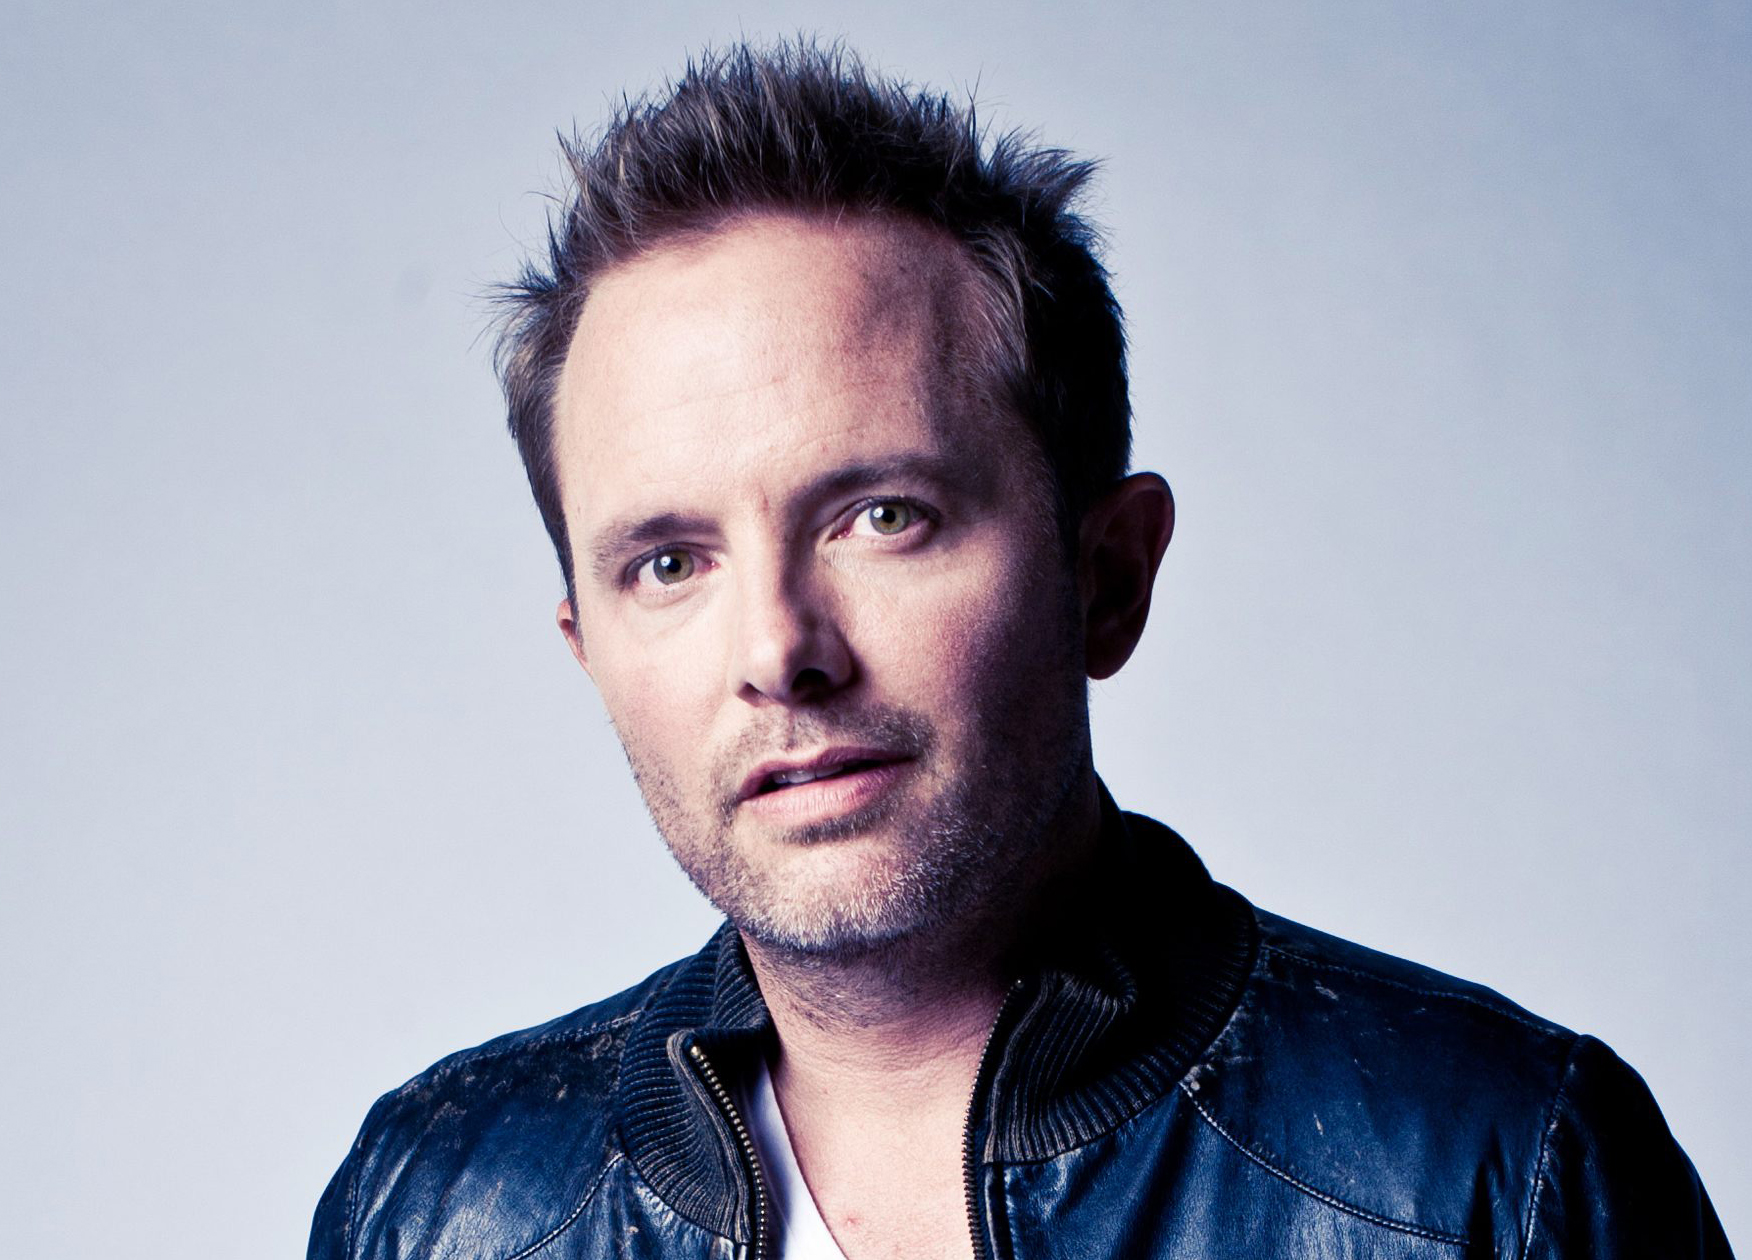 Billboard Music Award Nominations Announced With Chris Tomlin Picking Up 3